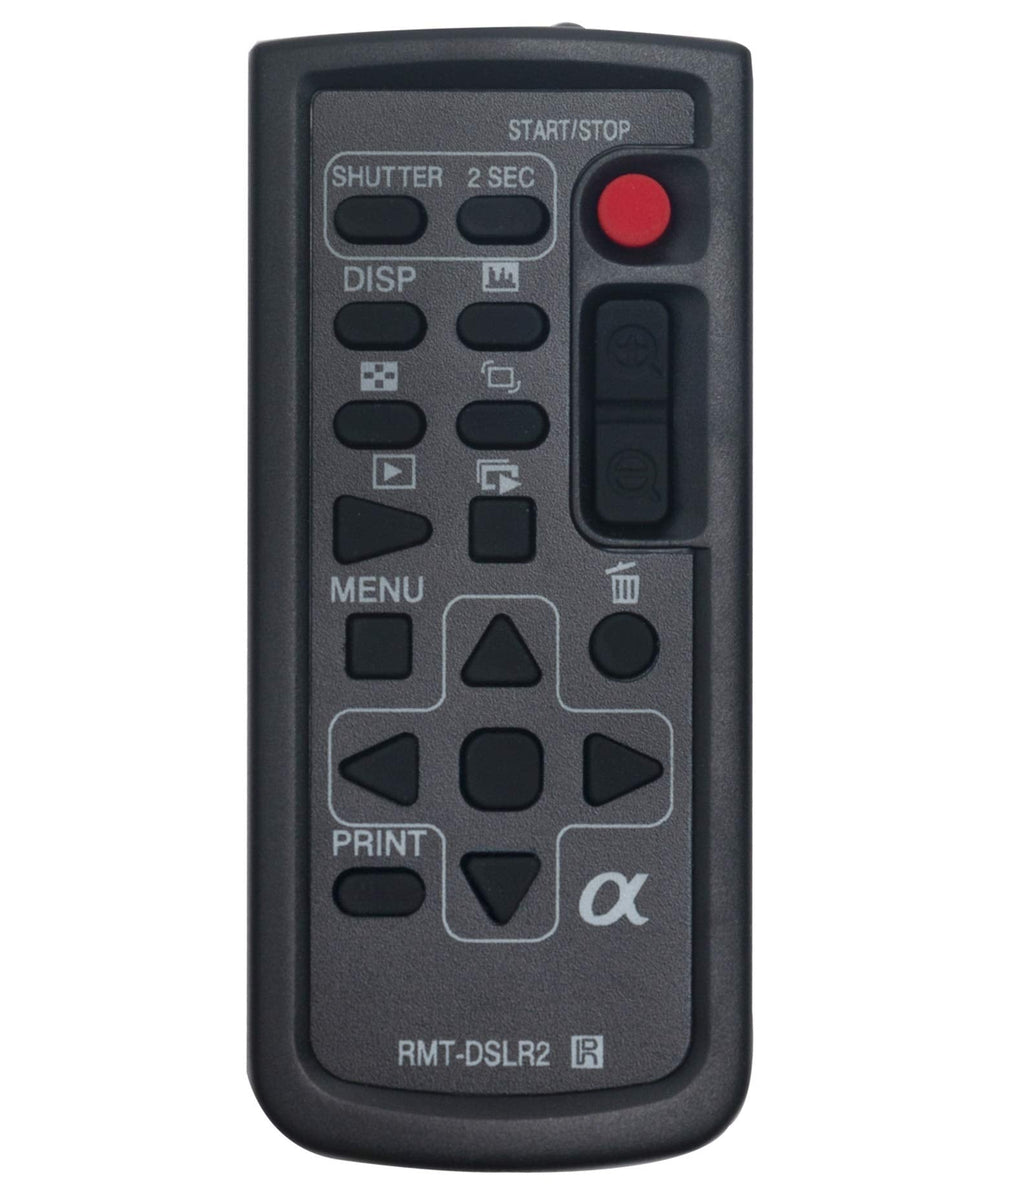 Replaced RMT-DSLR2 Wireless Remote Commander Replaced Remote fit for Sony Camera SLT-A33 SLT-A33L SLT-A55V DSLR-A290L DSLR-A390L DSLR-A500 DSLR-A500L DSLR-A550 DSLR-A850